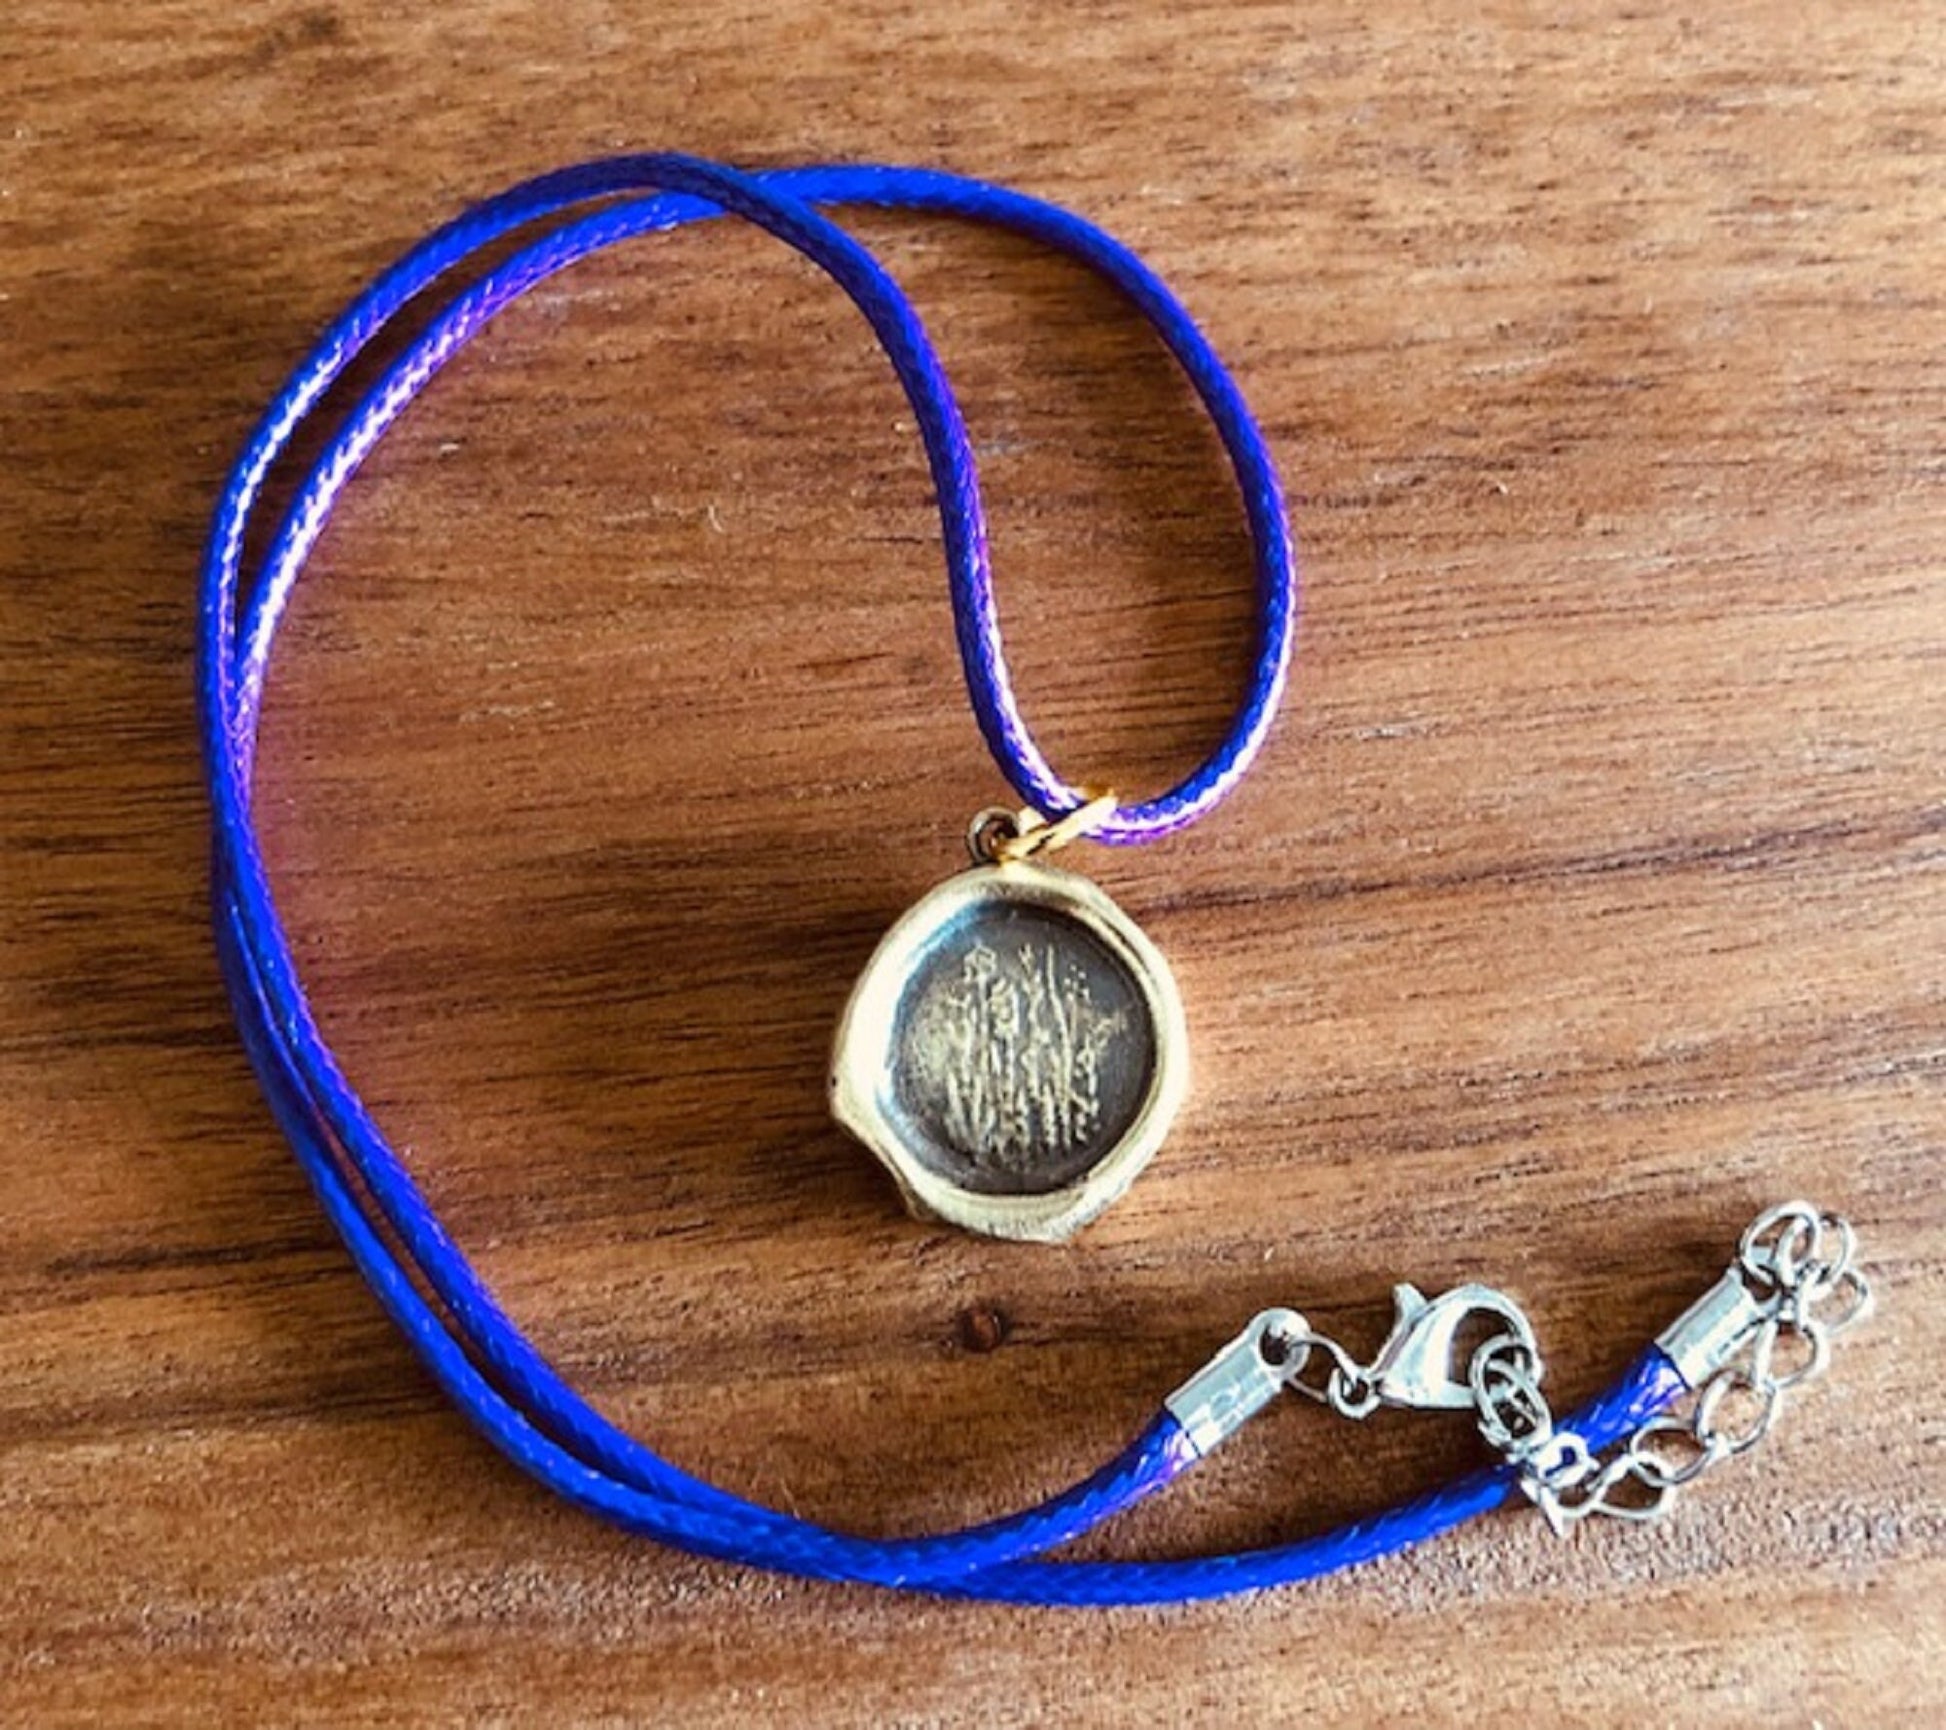 Bronze Wild Flowers Pendant Necklace- Joy, Freedom, Run Wild, Free Spirit- Jewelry From An Antique Wax Seal- From Charm Fascinations 102